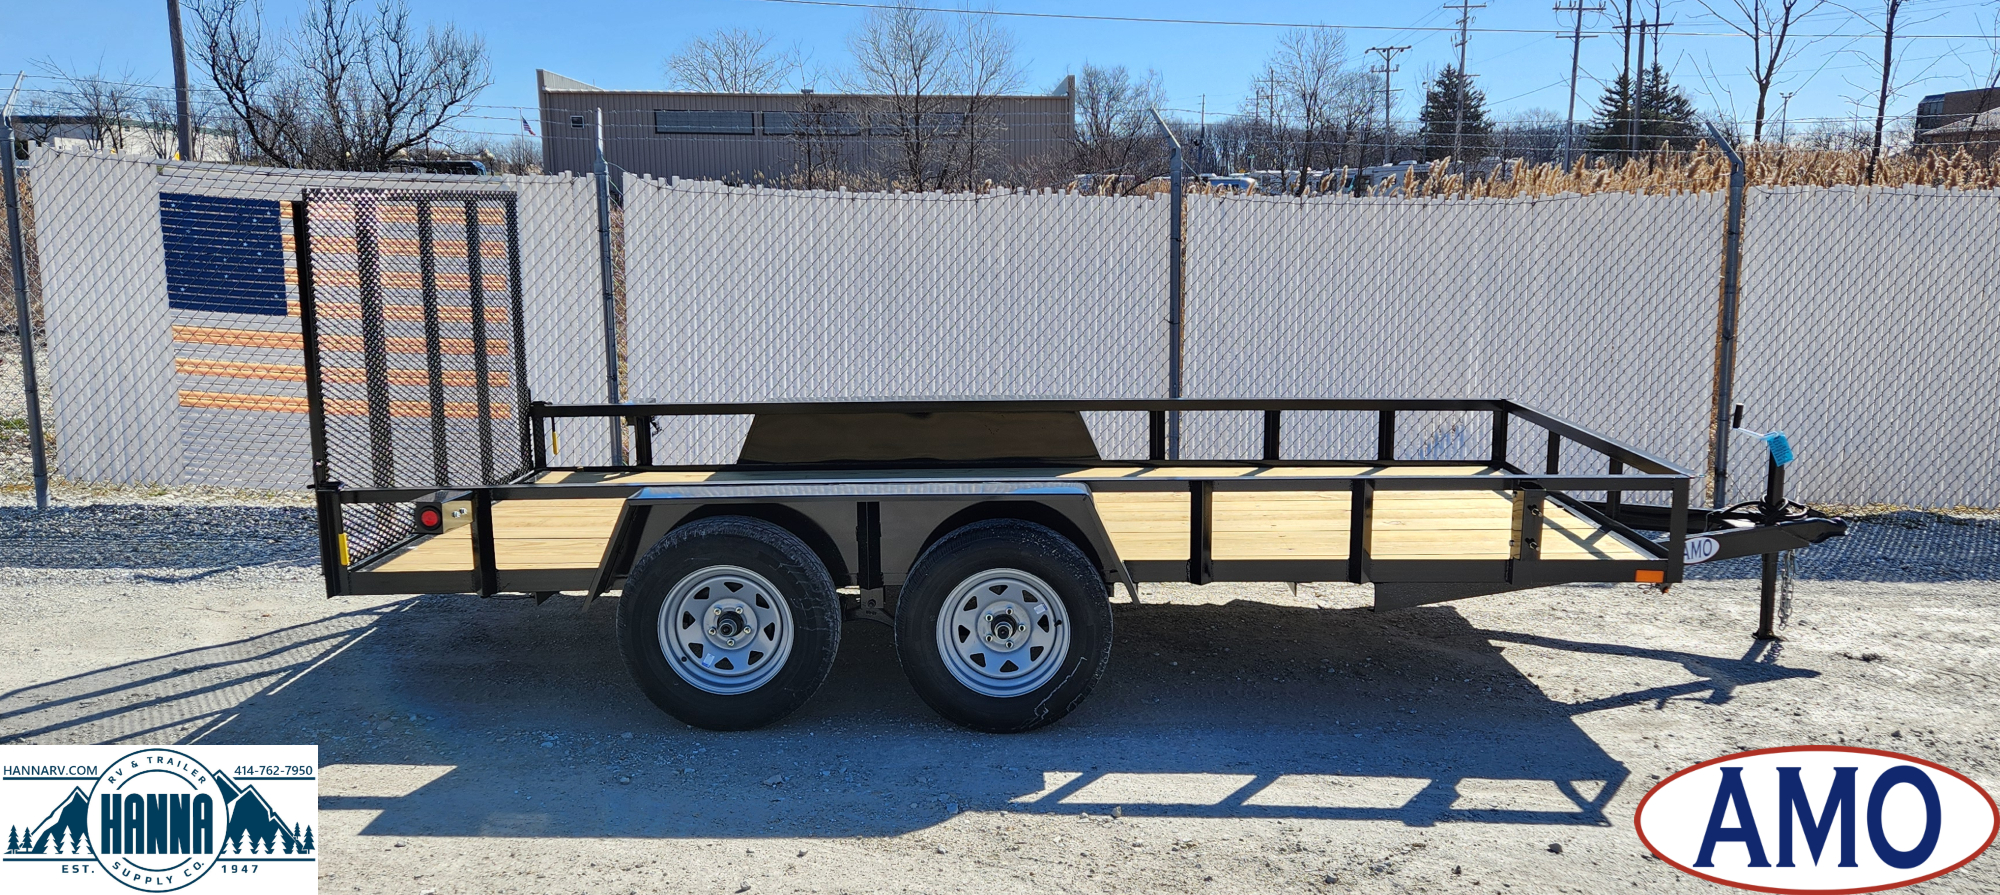 AMO 76" X 14' Steel Tandem Axle Utility Trailer with Ramp Gate and Short Side Rails